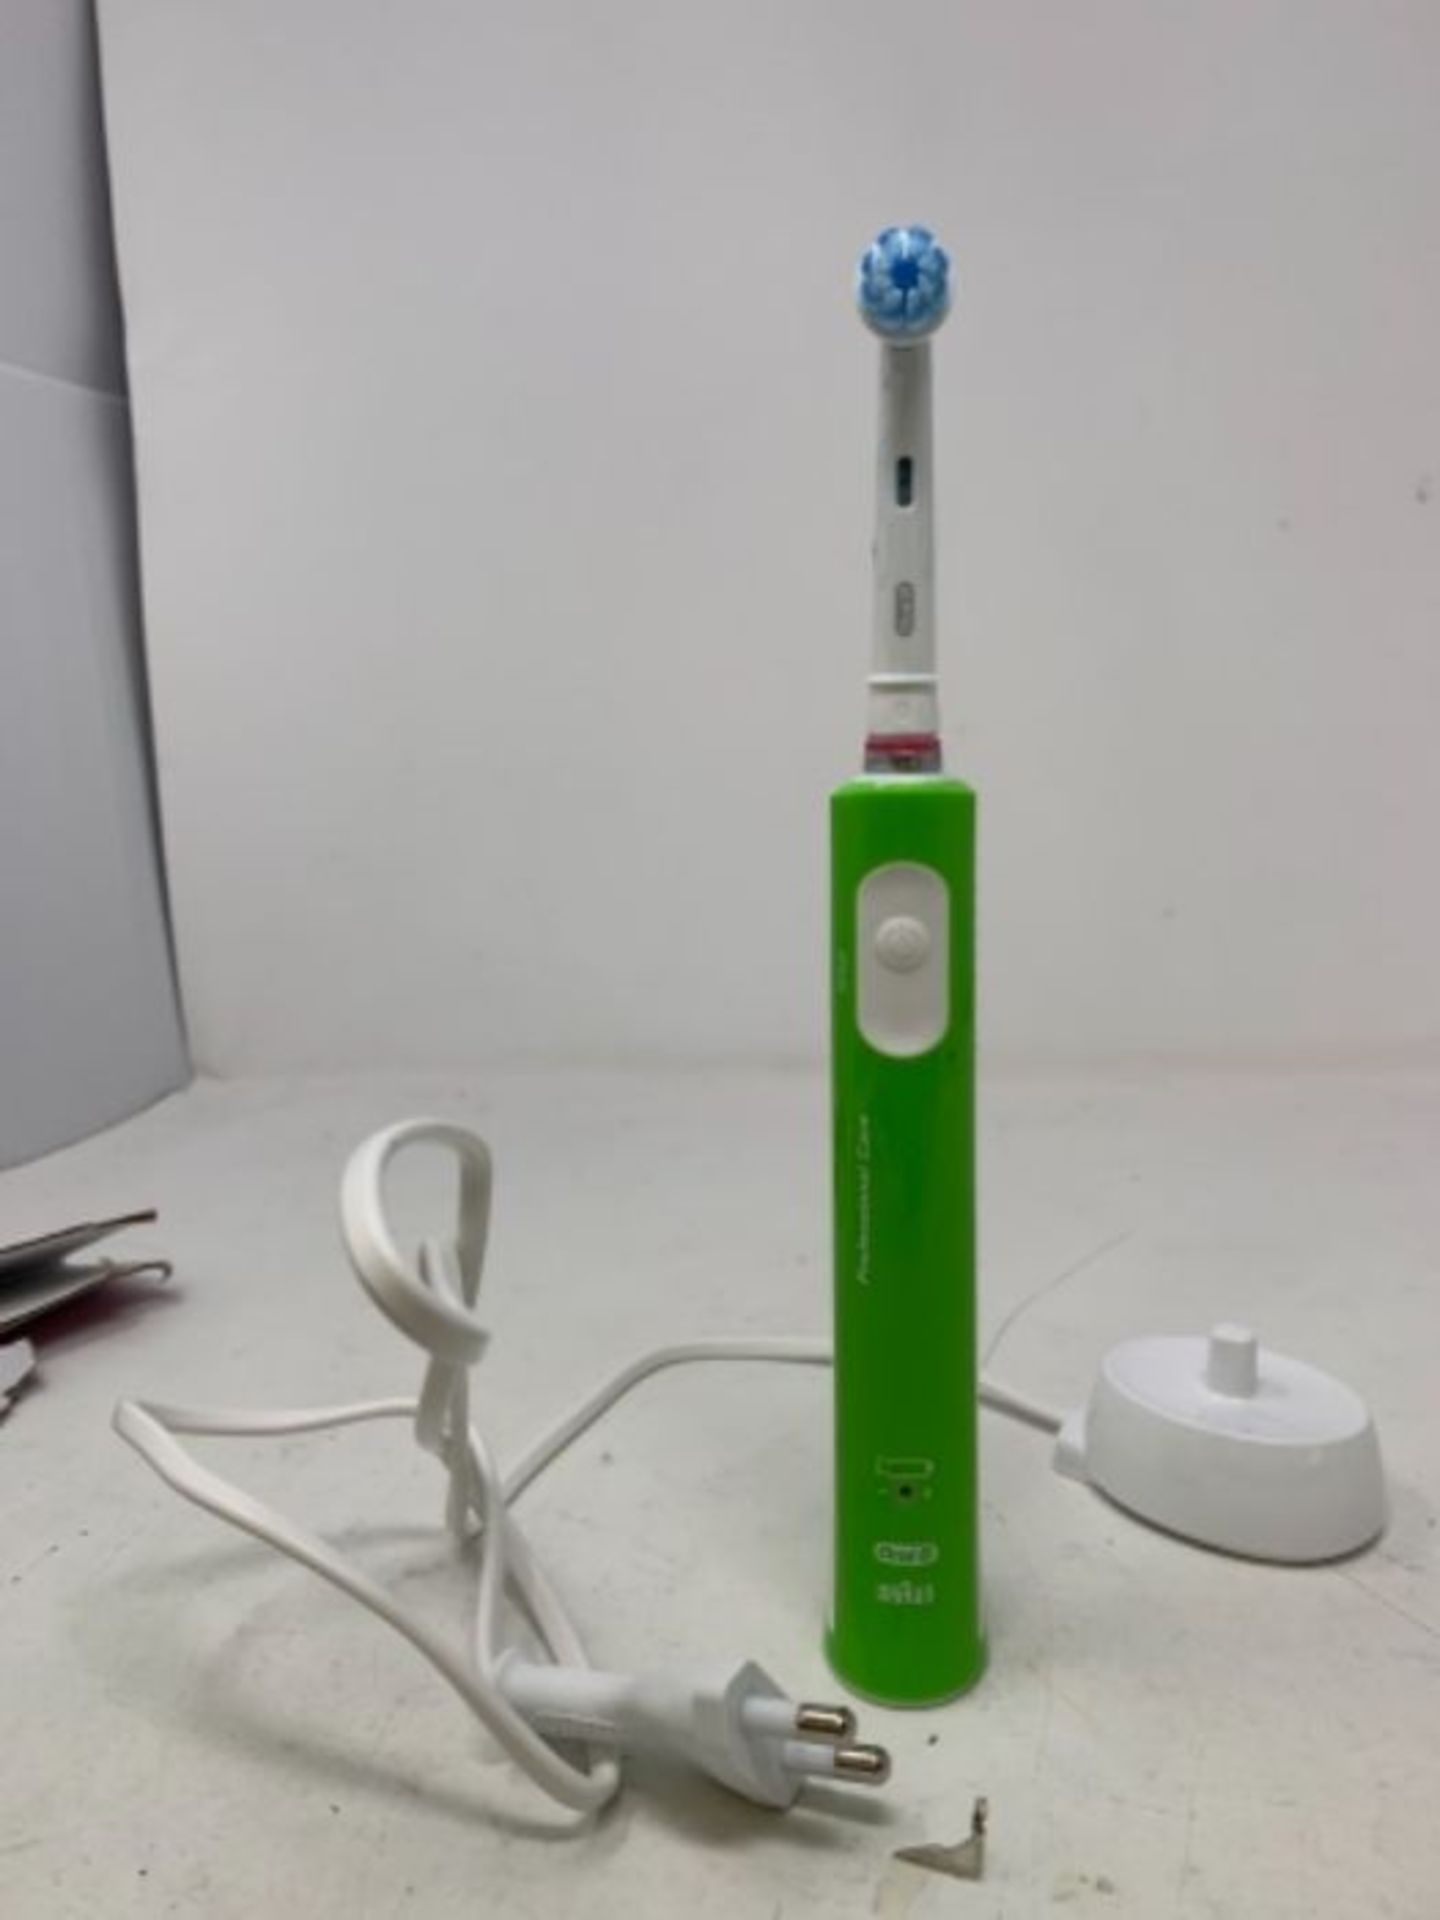 Oral-B Junior Kids Electric Rechargeable Toothbrush for Children Age 6-12, 1 Brush Han - Image 2 of 2